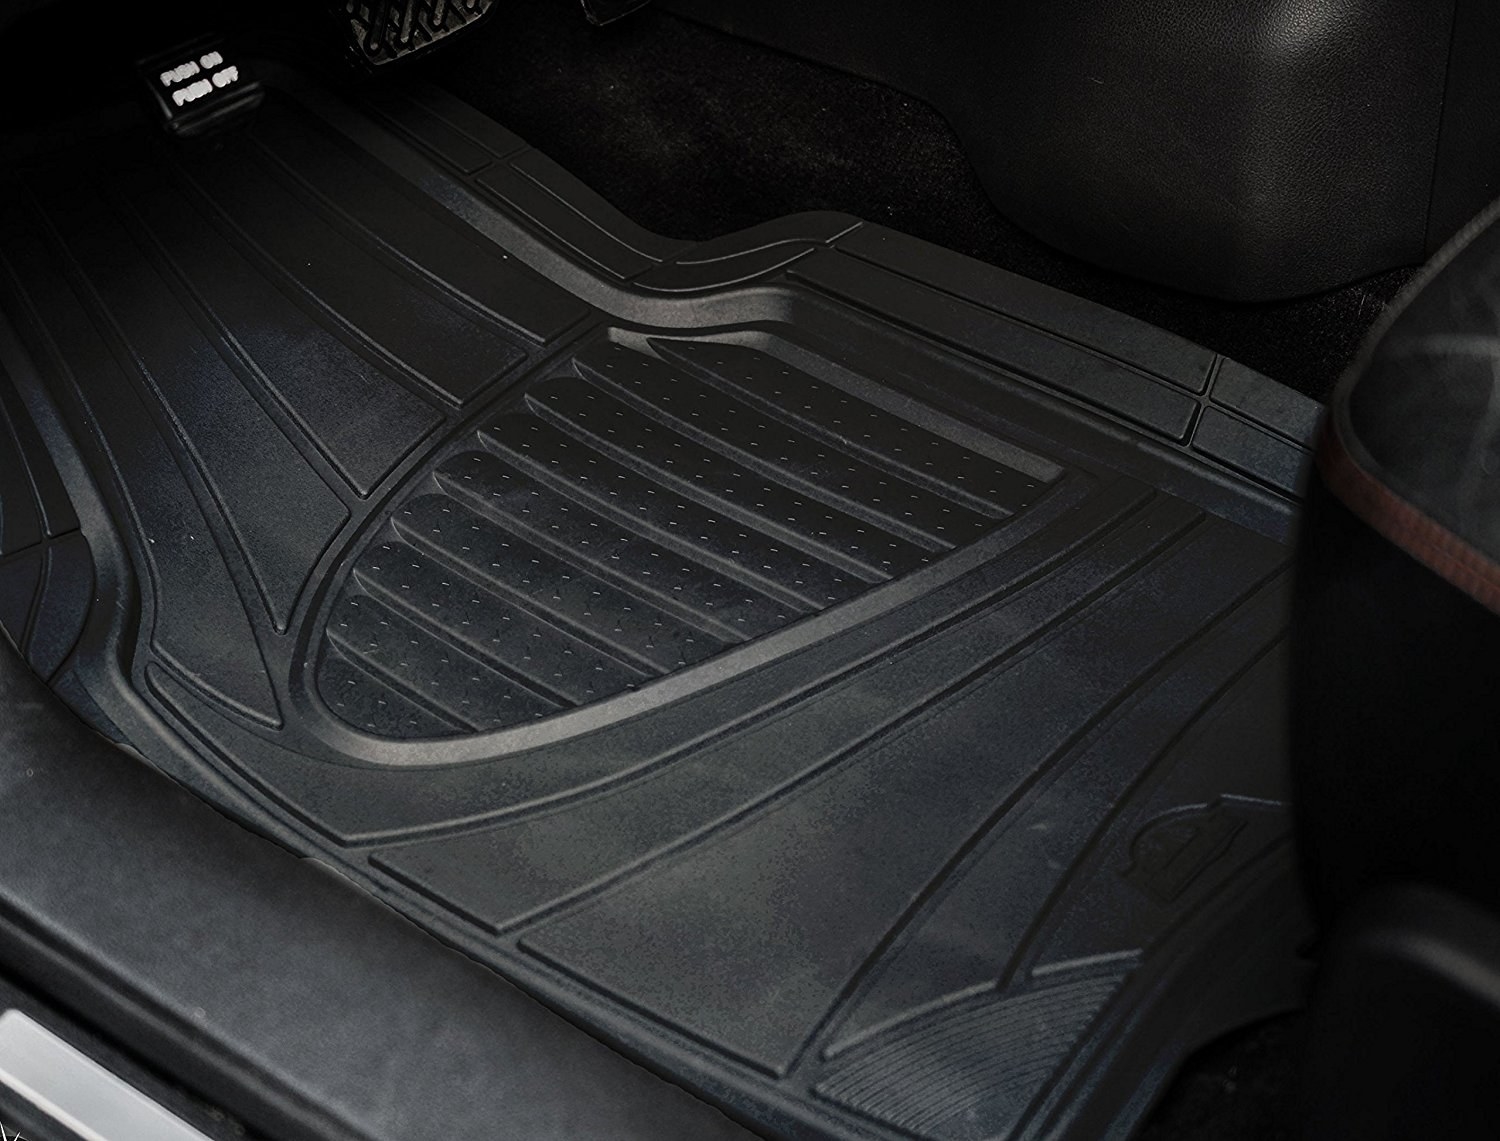 The mats on the floor of a car